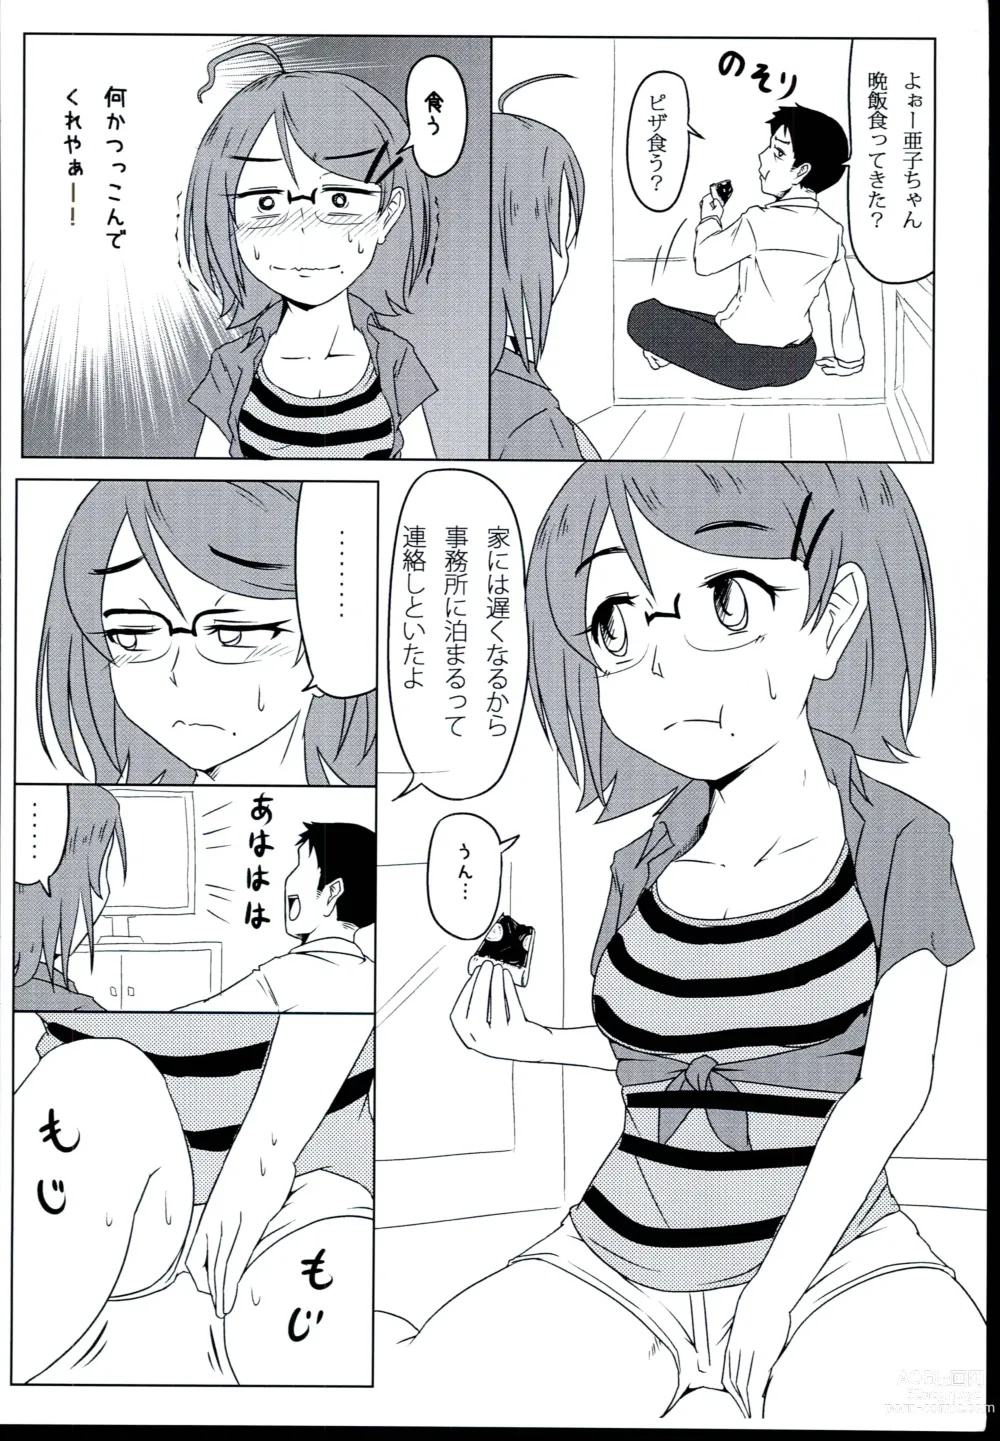 Page 6 of doujinshi After Zero